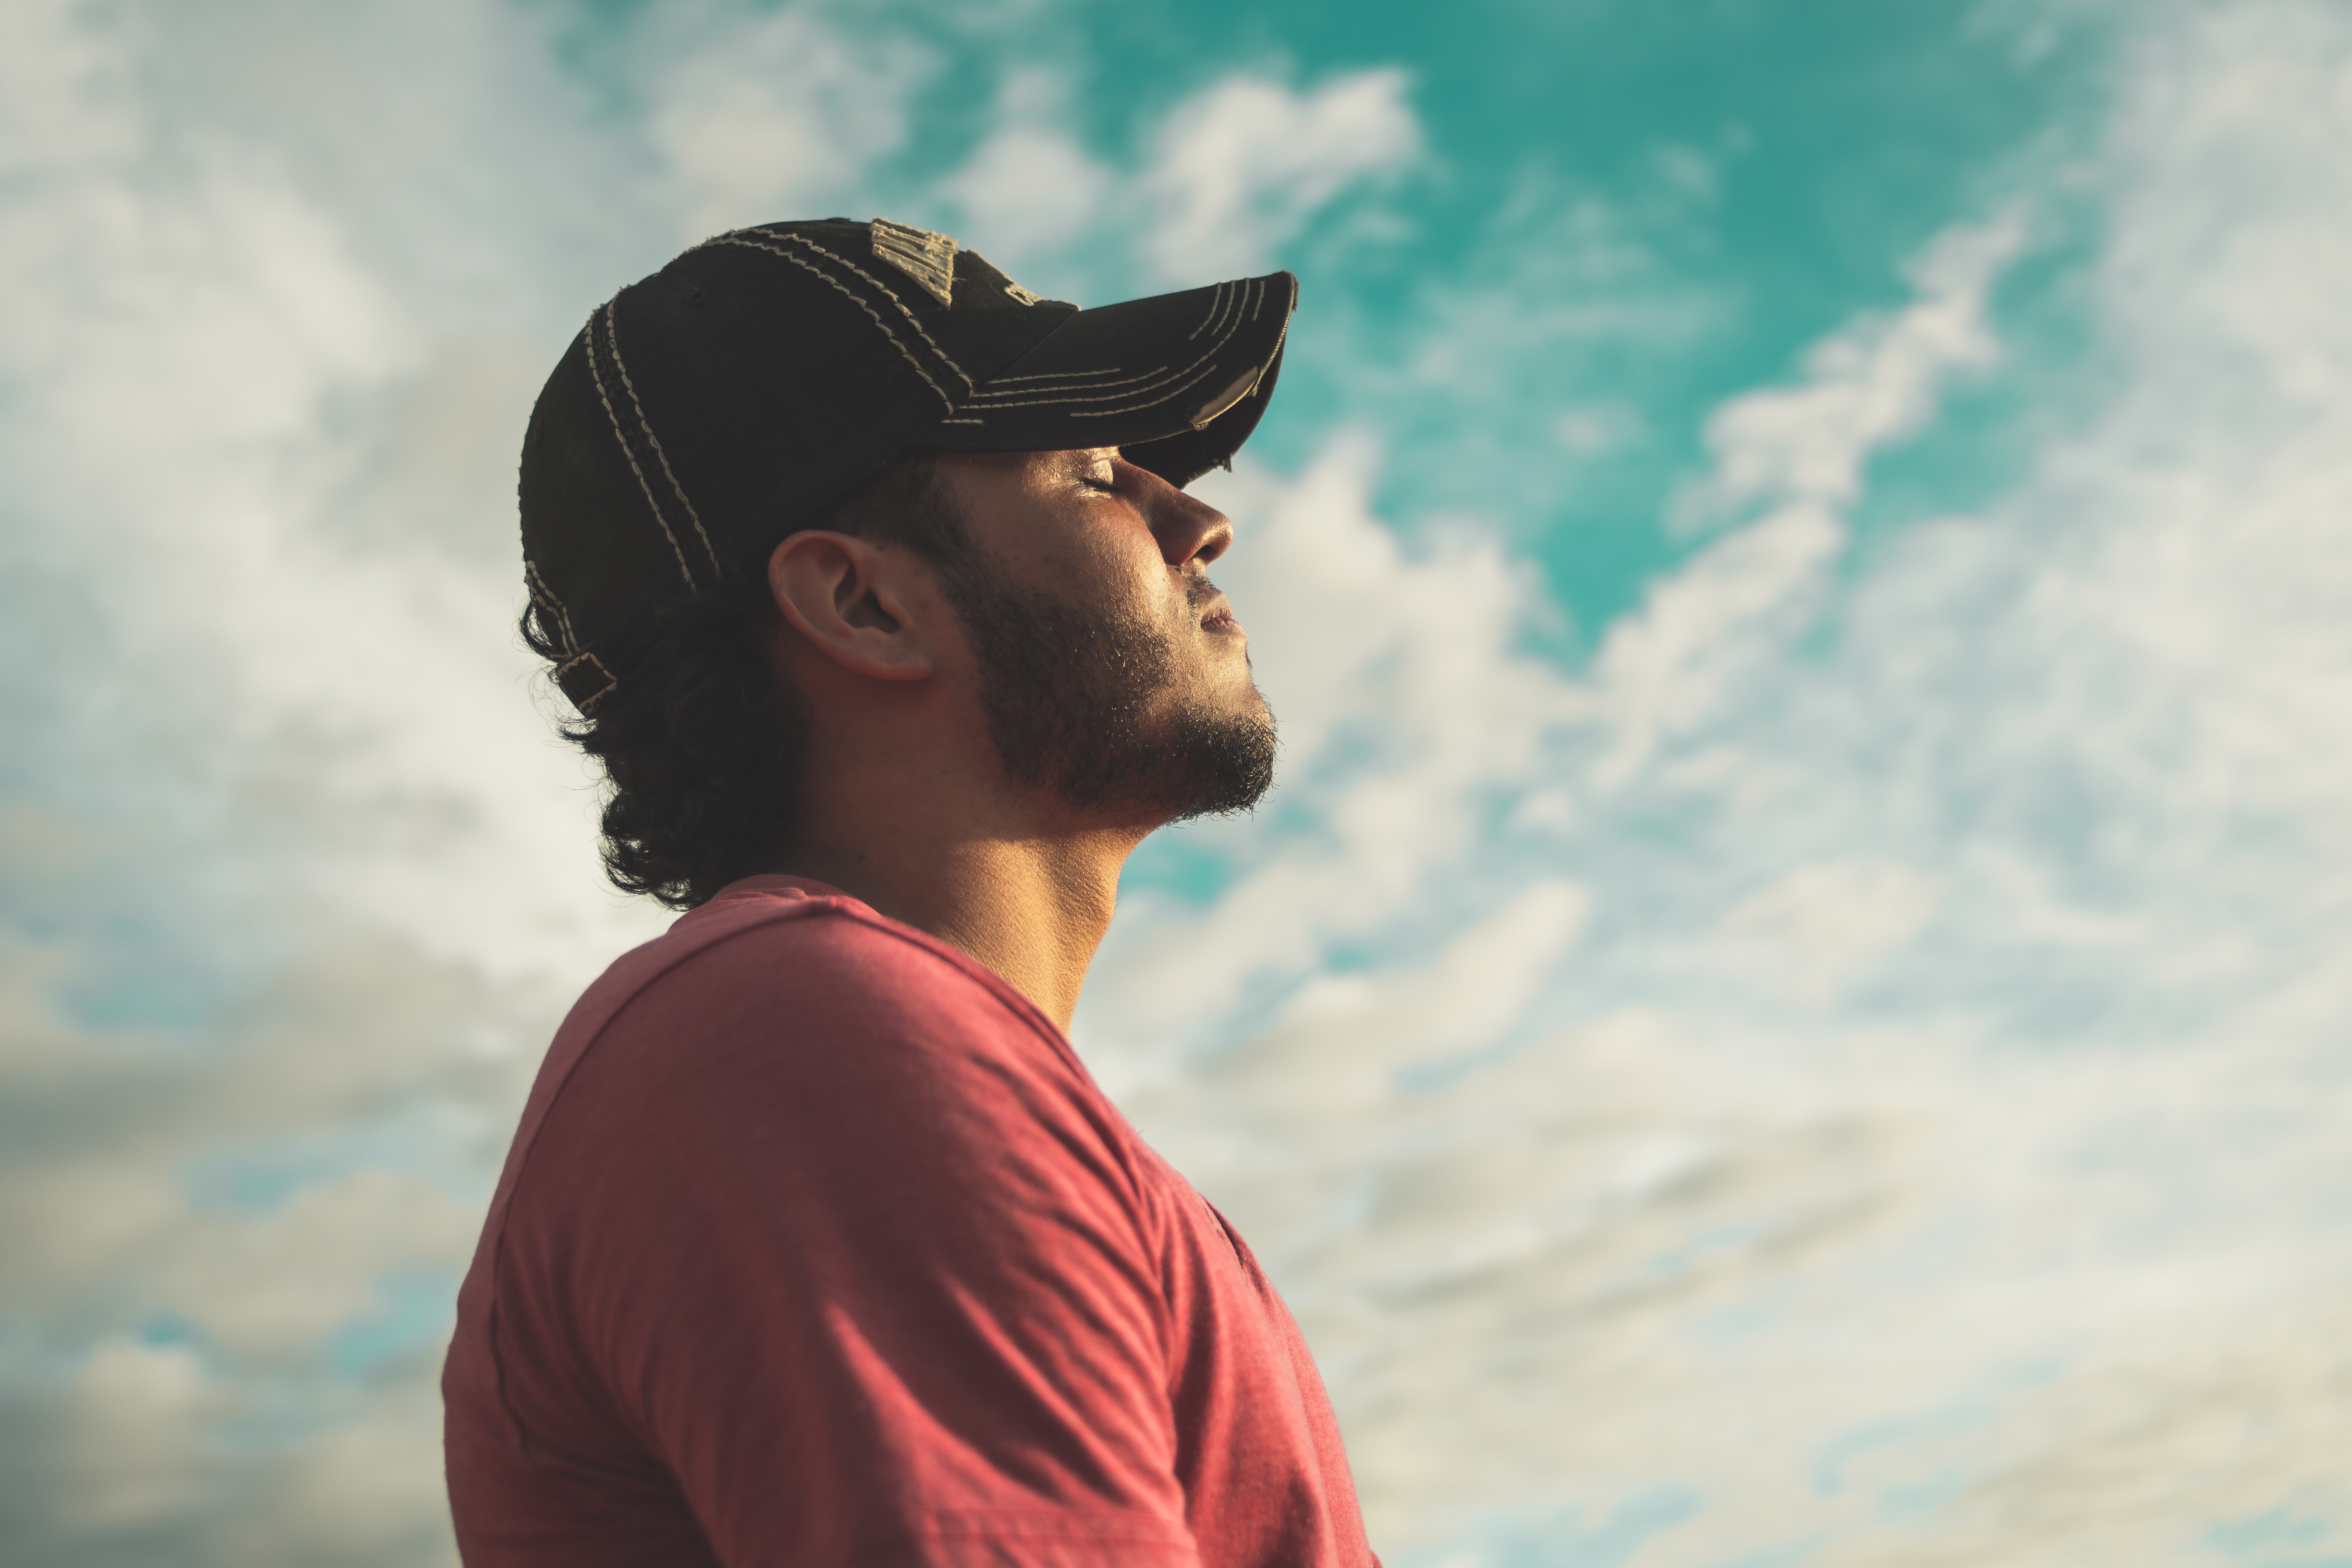 Man wearing black cap with eyes closed under cloudy sky photo